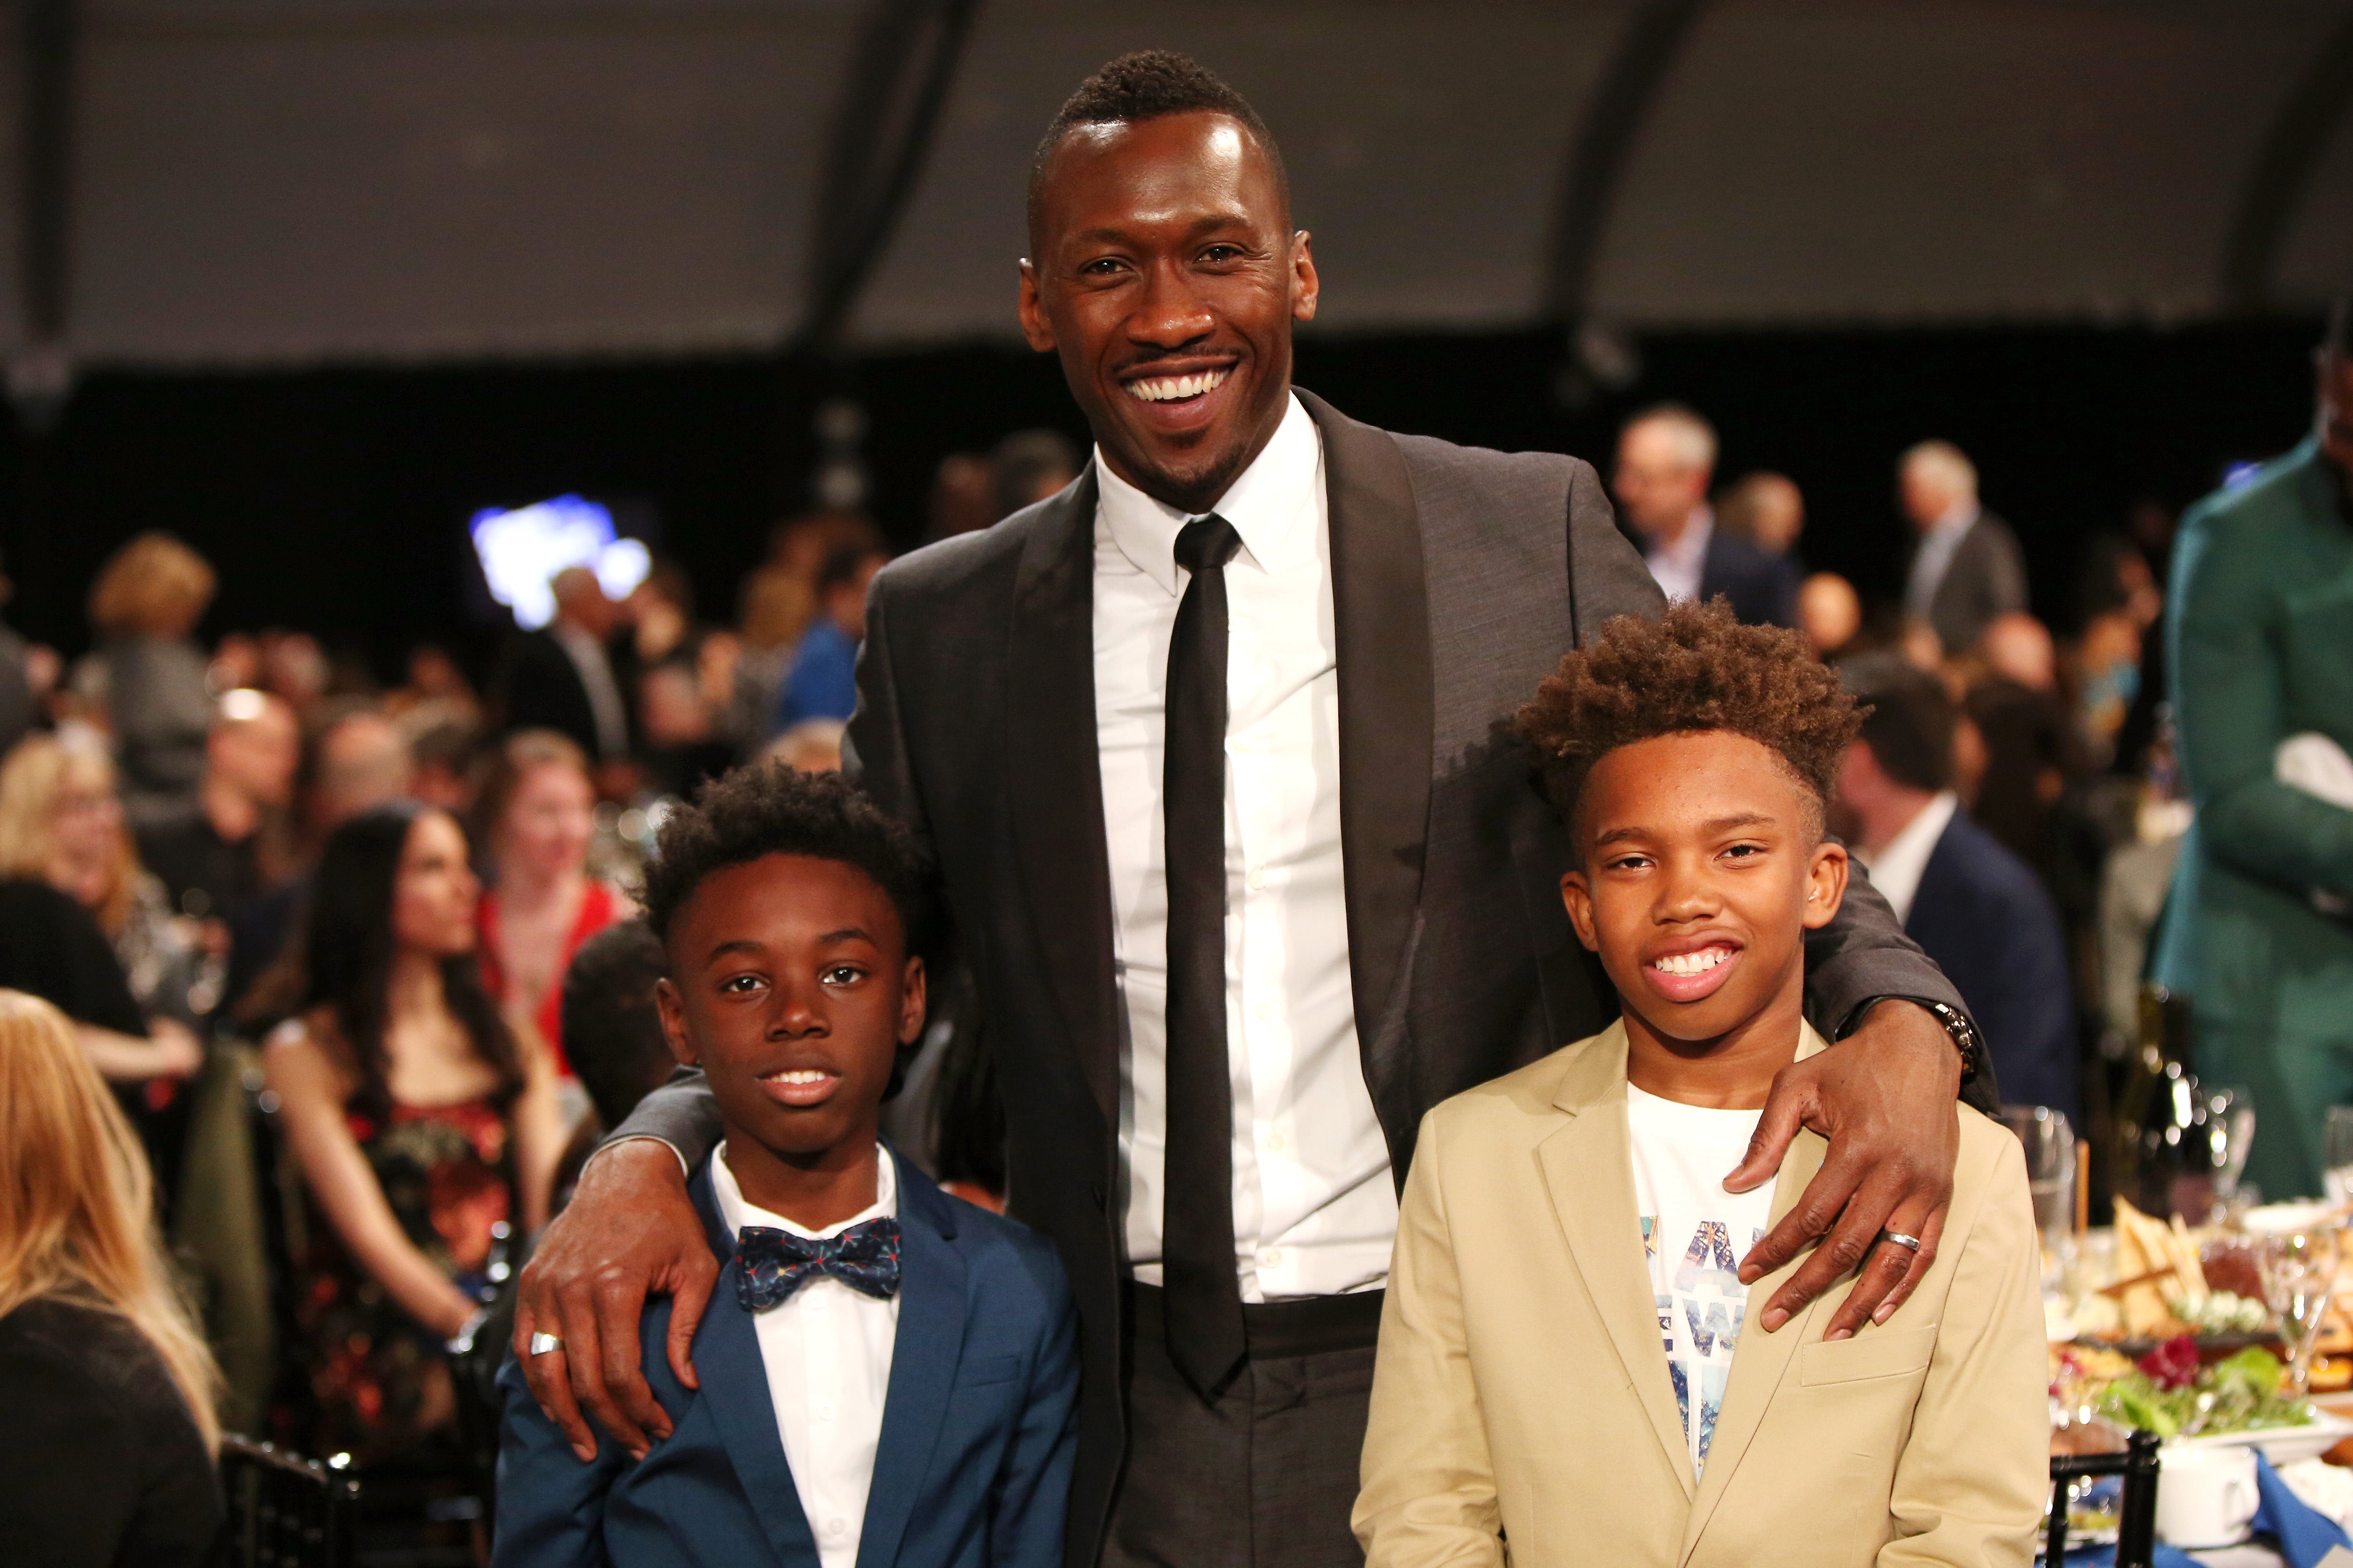 The Young Stars Of ‘Moonlight’ Head Back To School After Oscar Win